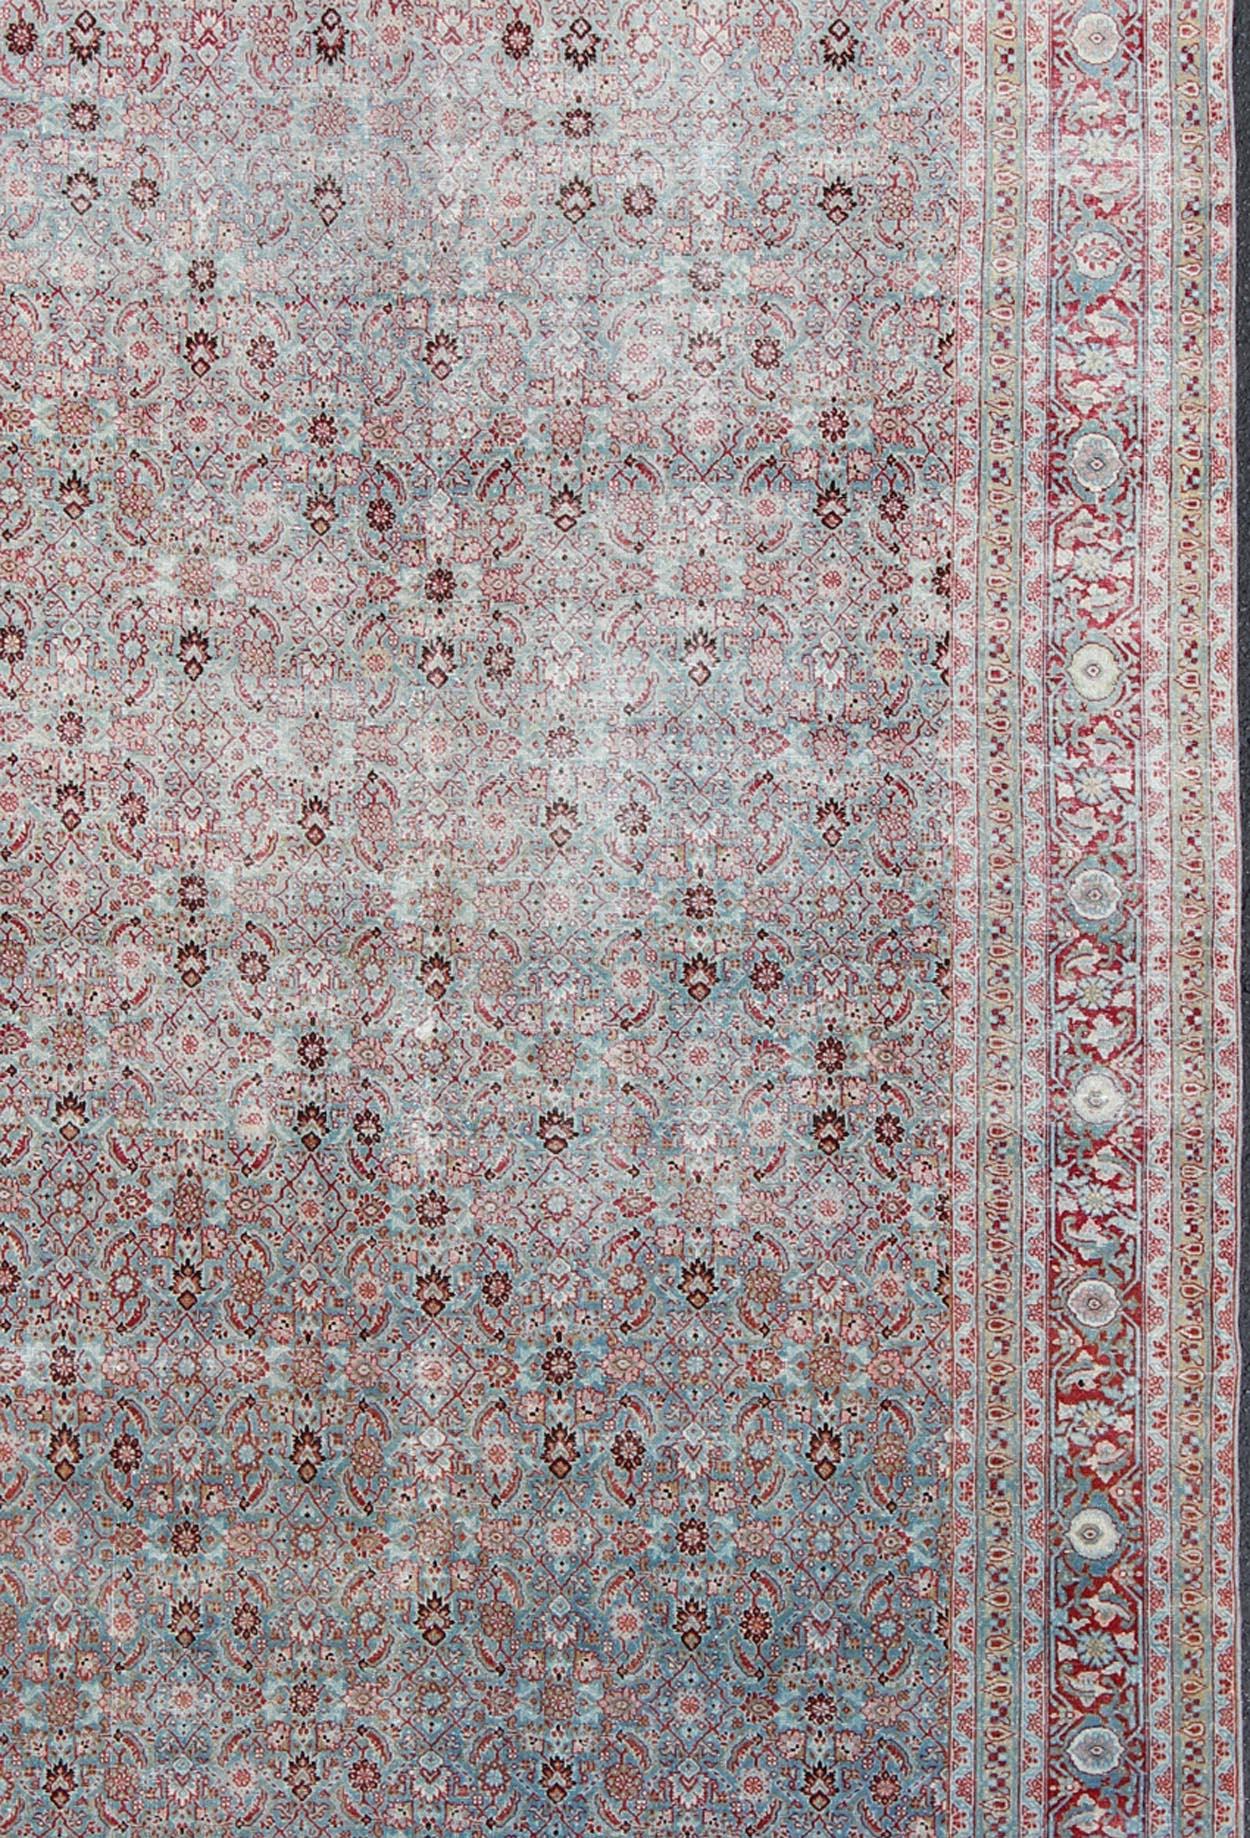 Antique Persian Tabriz Rug with All-Over Geometric Design in Light Blue and Red In Good Condition For Sale In Atlanta, GA